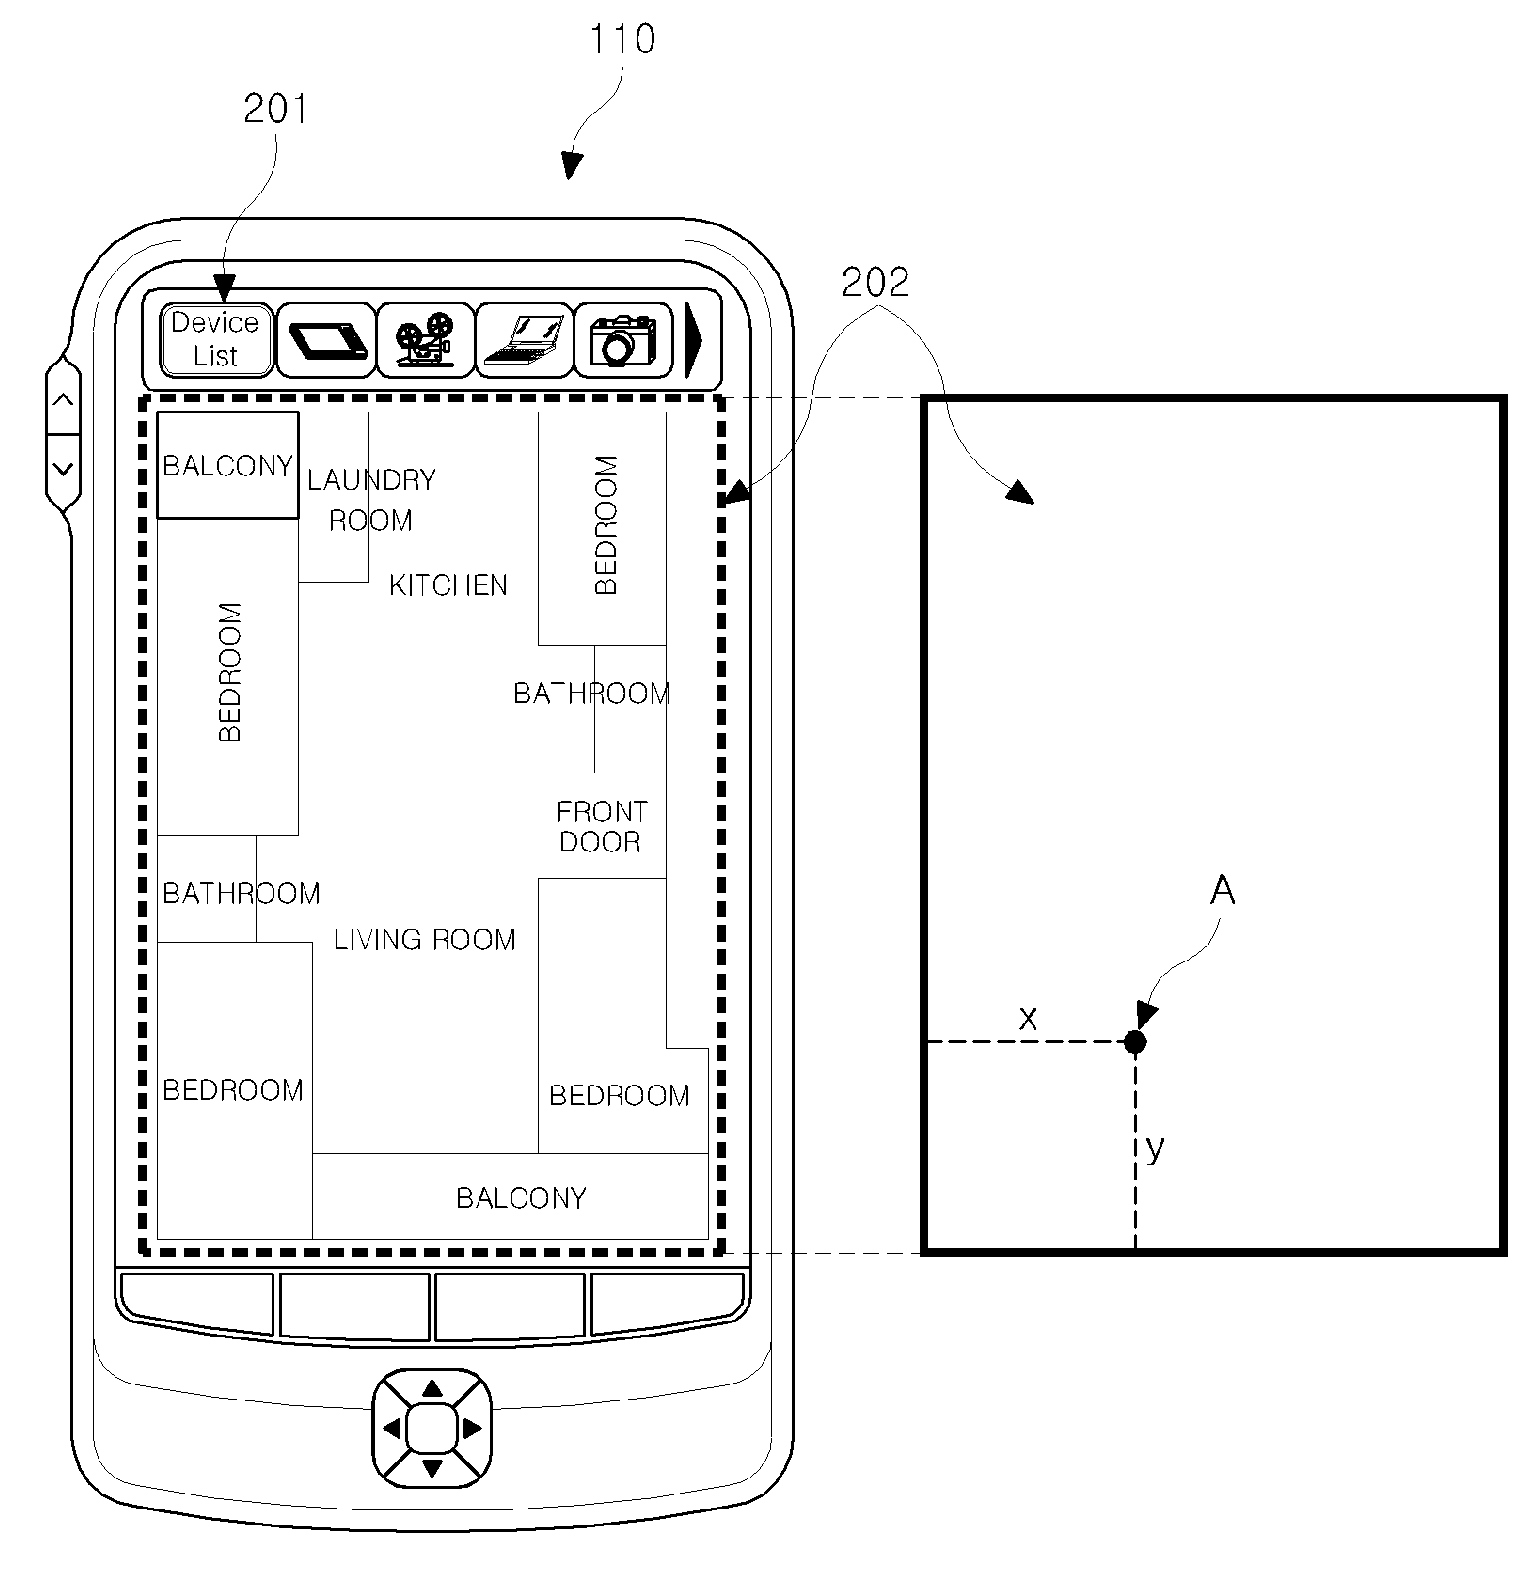 System and method for managing location information for home network